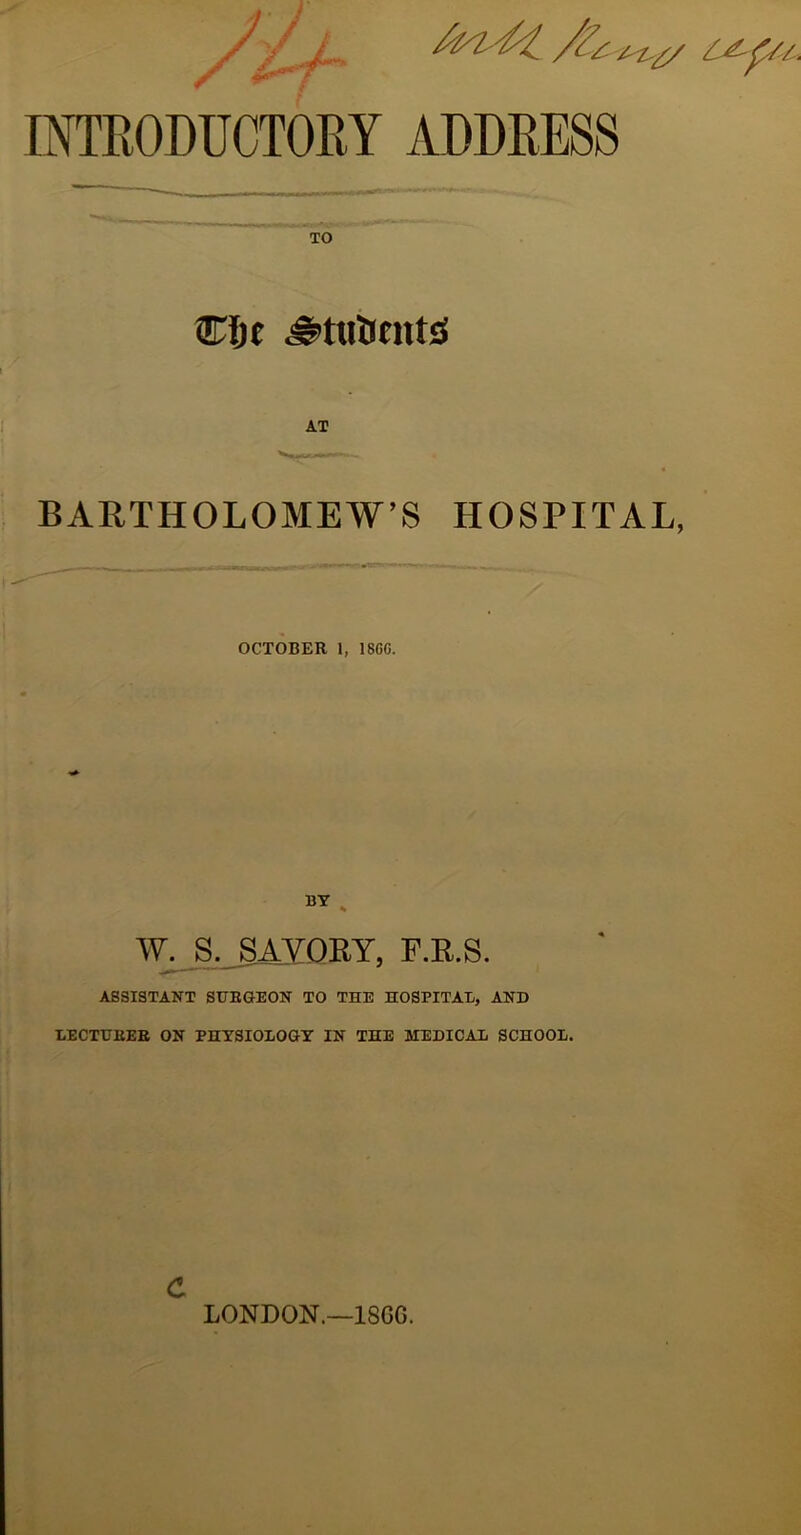 INTRODUCTORY ADDRESS TO Cljf BARTHOLOMEW’S HOSPITAL, OCTOBER 1, 18GC. BT , Ay^,_SAYQRY, F.R.S. ASSISTANT SURGEON TO THE HOSPITAU, AND LECTURER ON PHTSIOLOGY IN THE MEDICAL SCHOOL. c LONDON.—18GG.